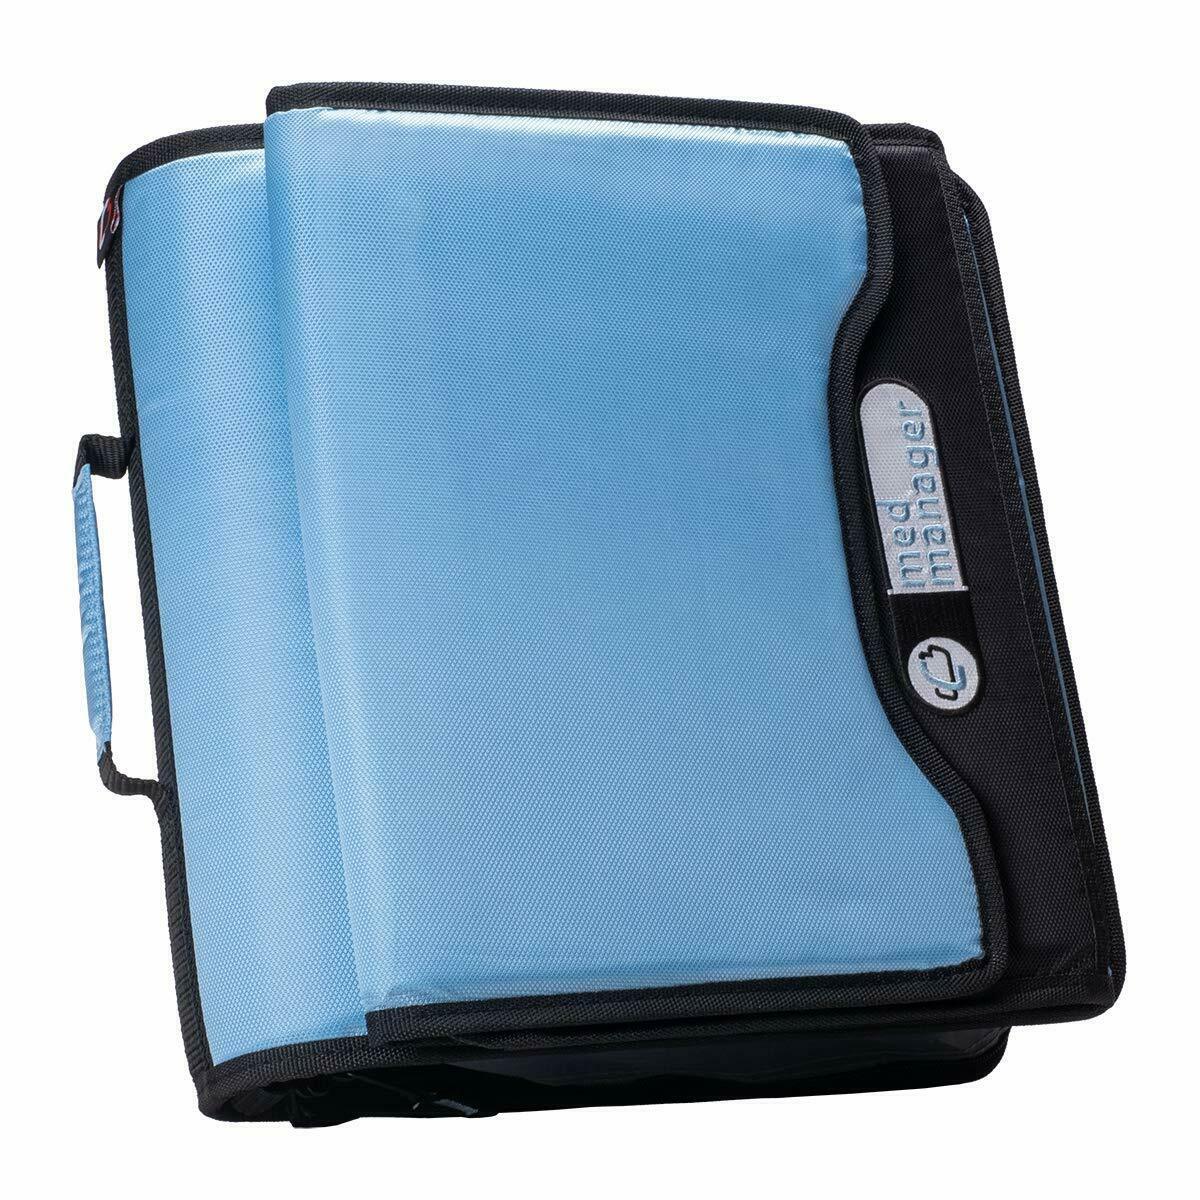 Med Manager Diabetic Supply Organizer With Insulin Cooler Travel Case, Blue